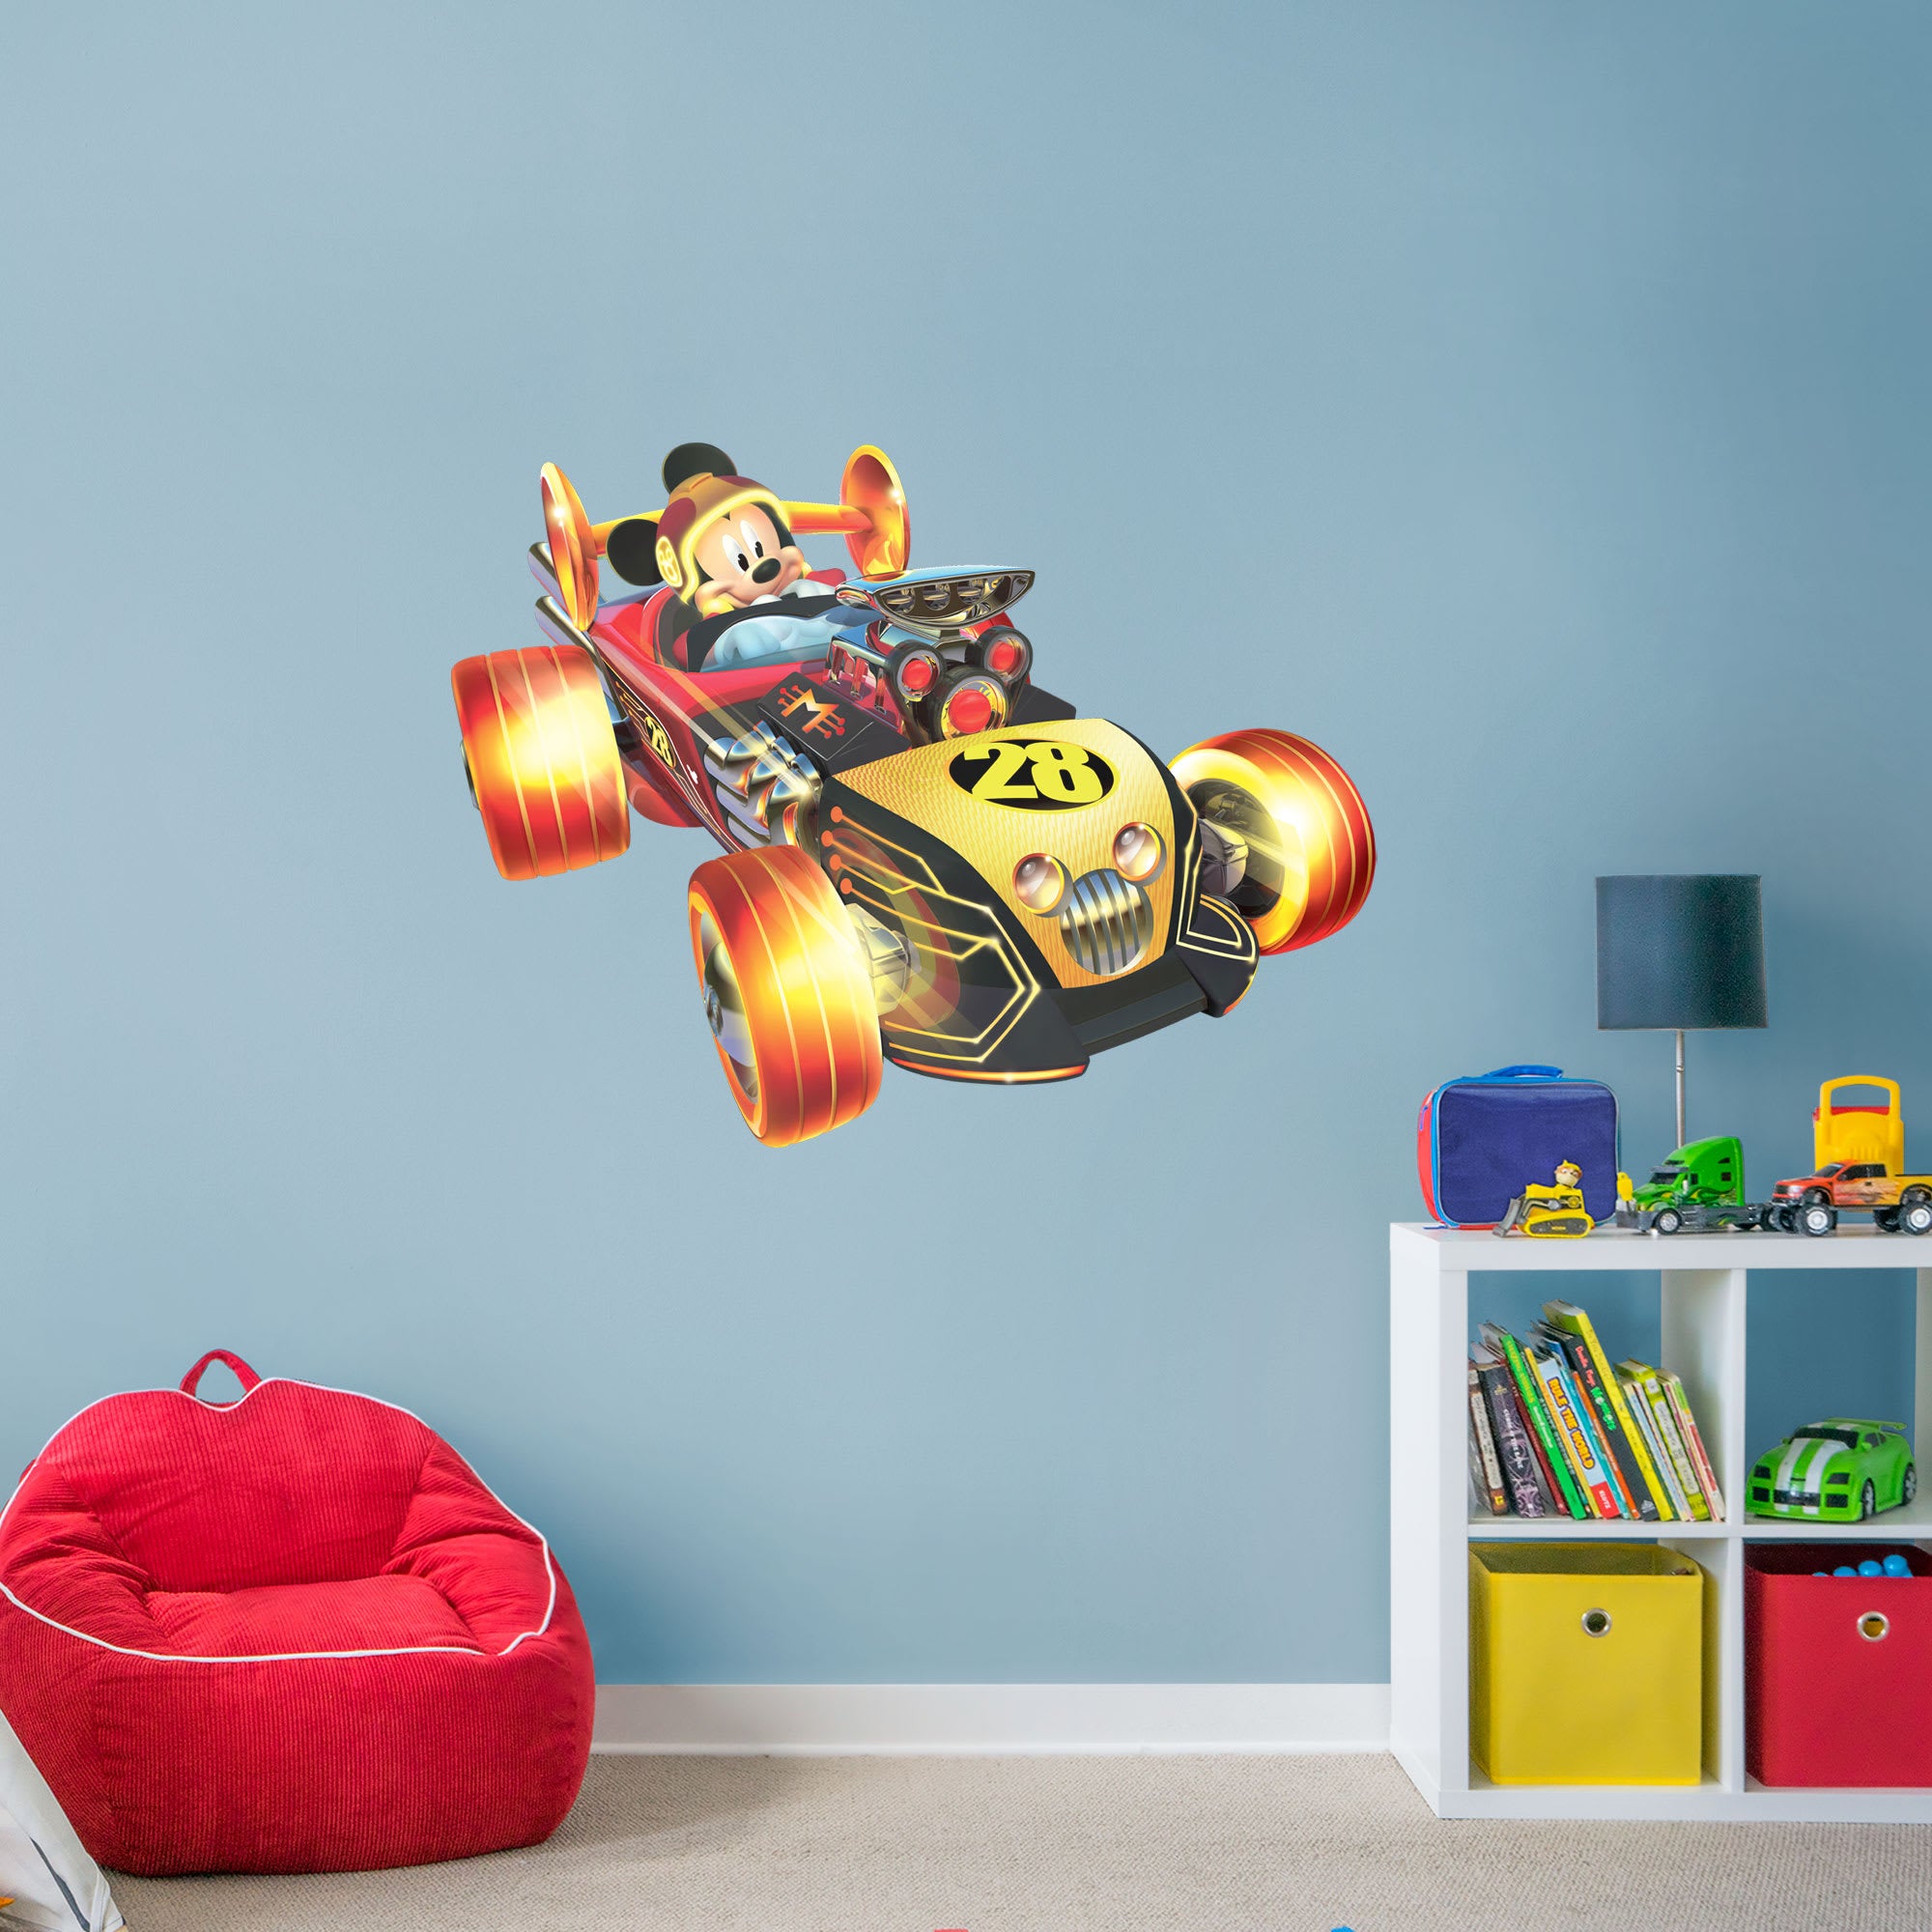 Mickey and the Roadster Racers: Mickey Mouse Racecar - Officially Licensed Disney Removable Wall Decal Giant Character + 2 Decal